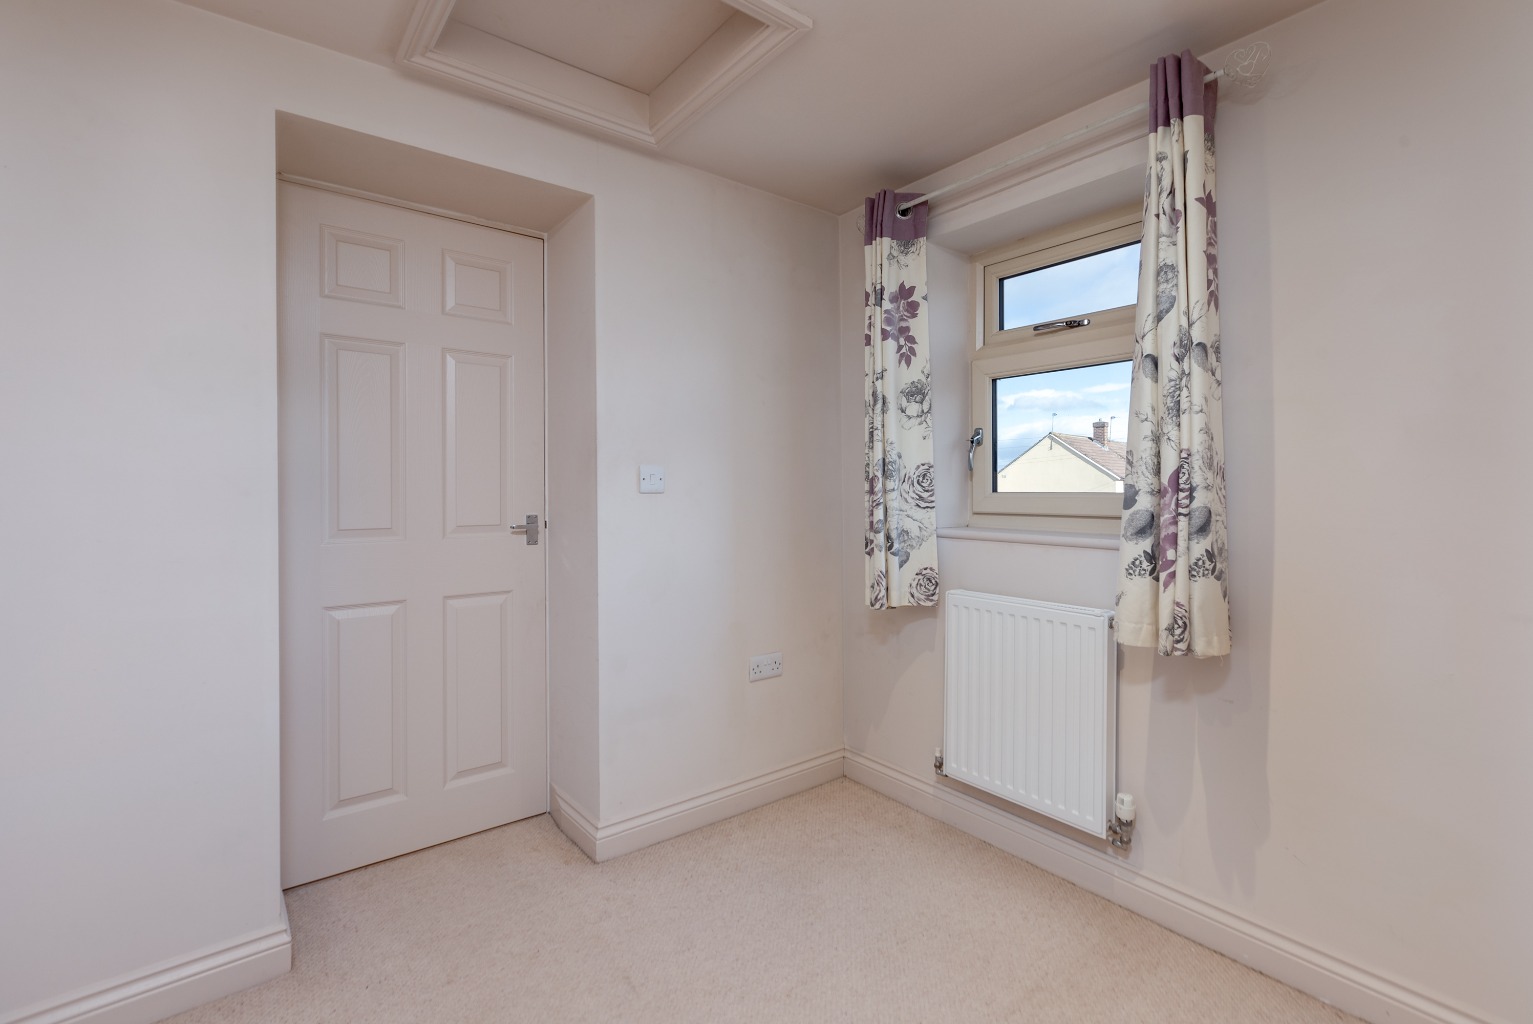 3 bed cottage to rent, Catterick Garrison  - Property Image 8